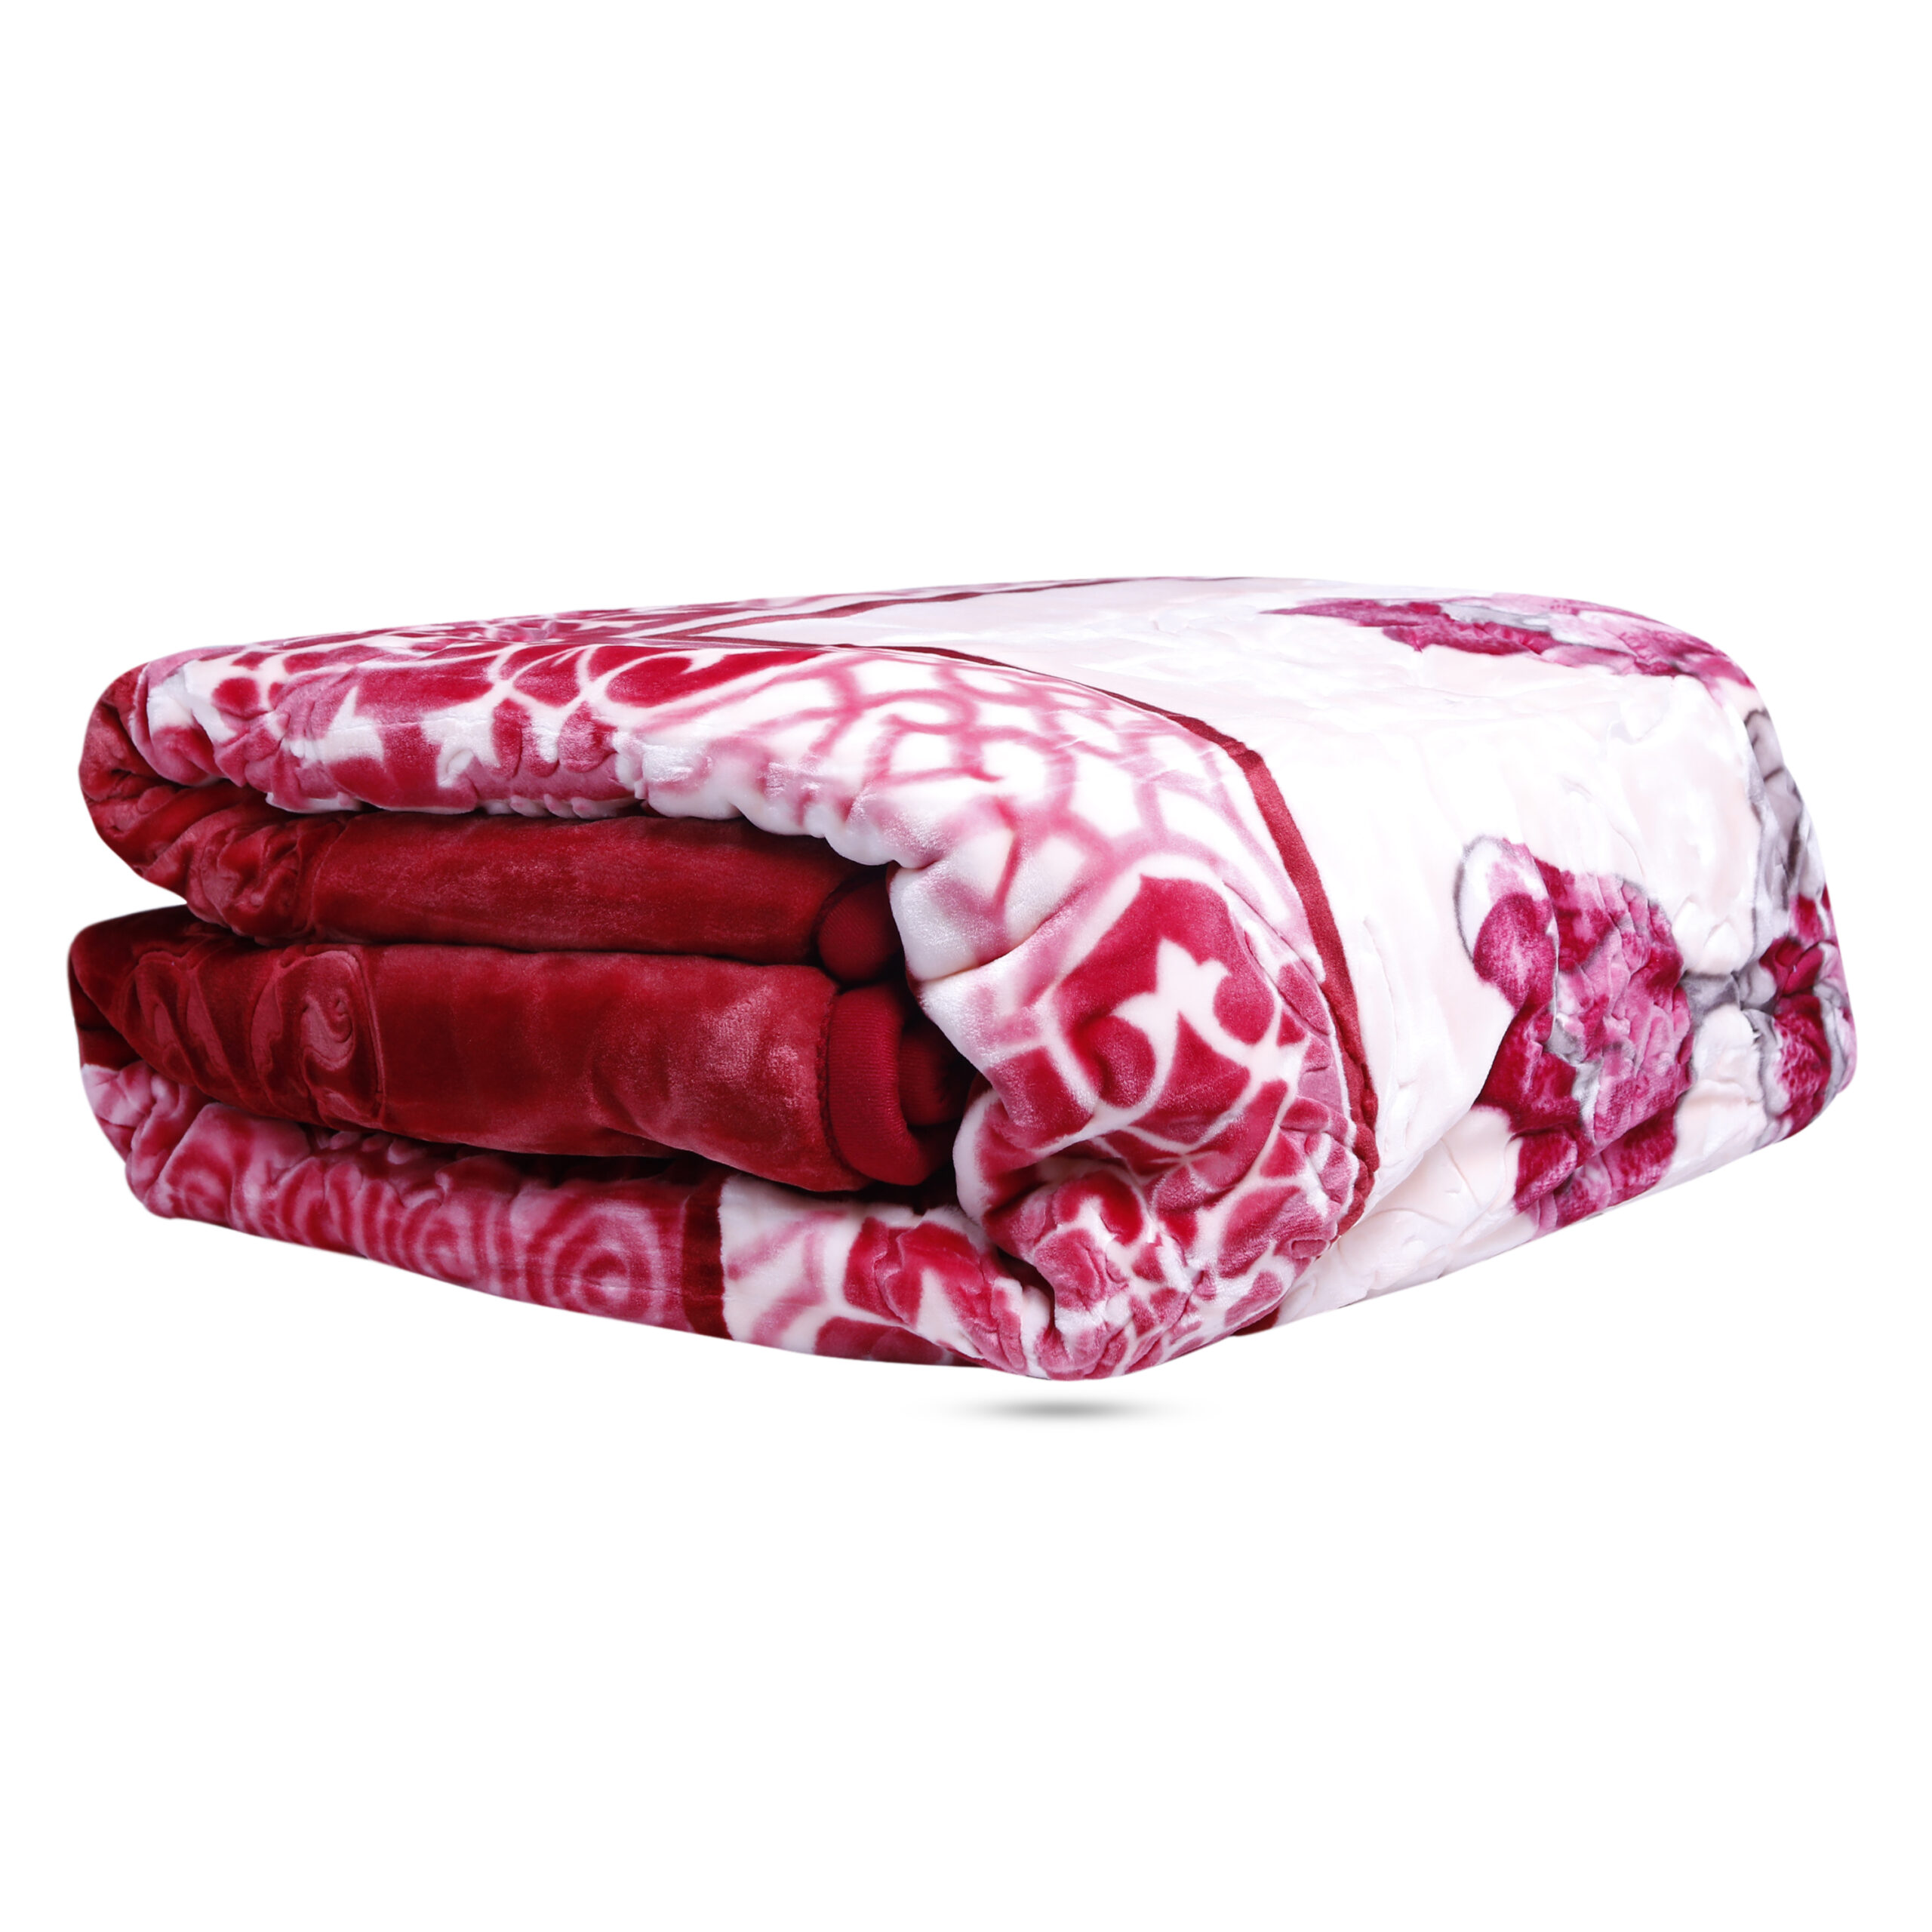 PARRY LIFE PLBL7531M2 Emarati Floral Maroon Bordered Double 2 Ply ...